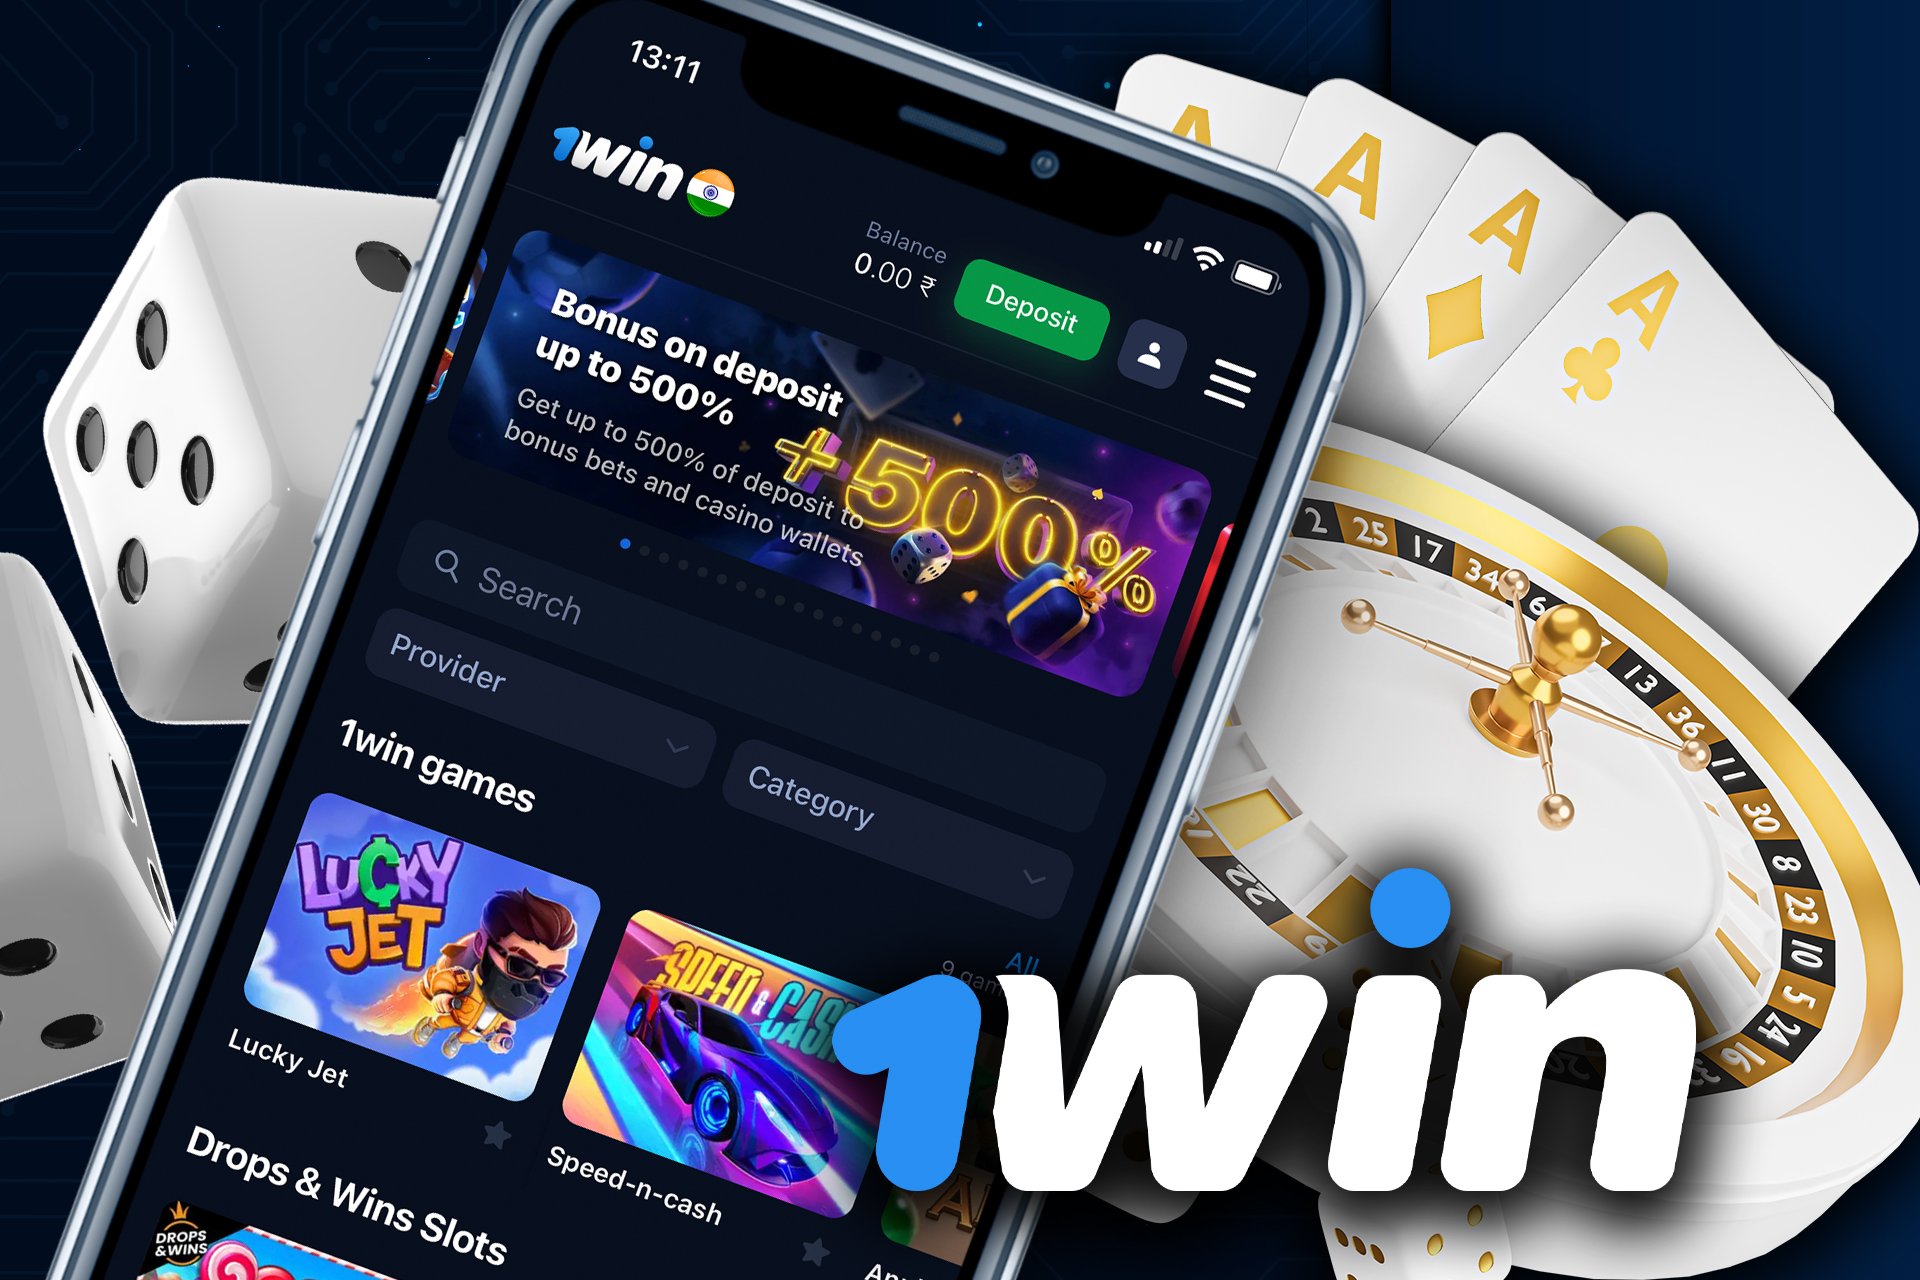 1win mobile casino allows you playing all the popular games, such as blackjack, poker, bacarrat, roulette and other.